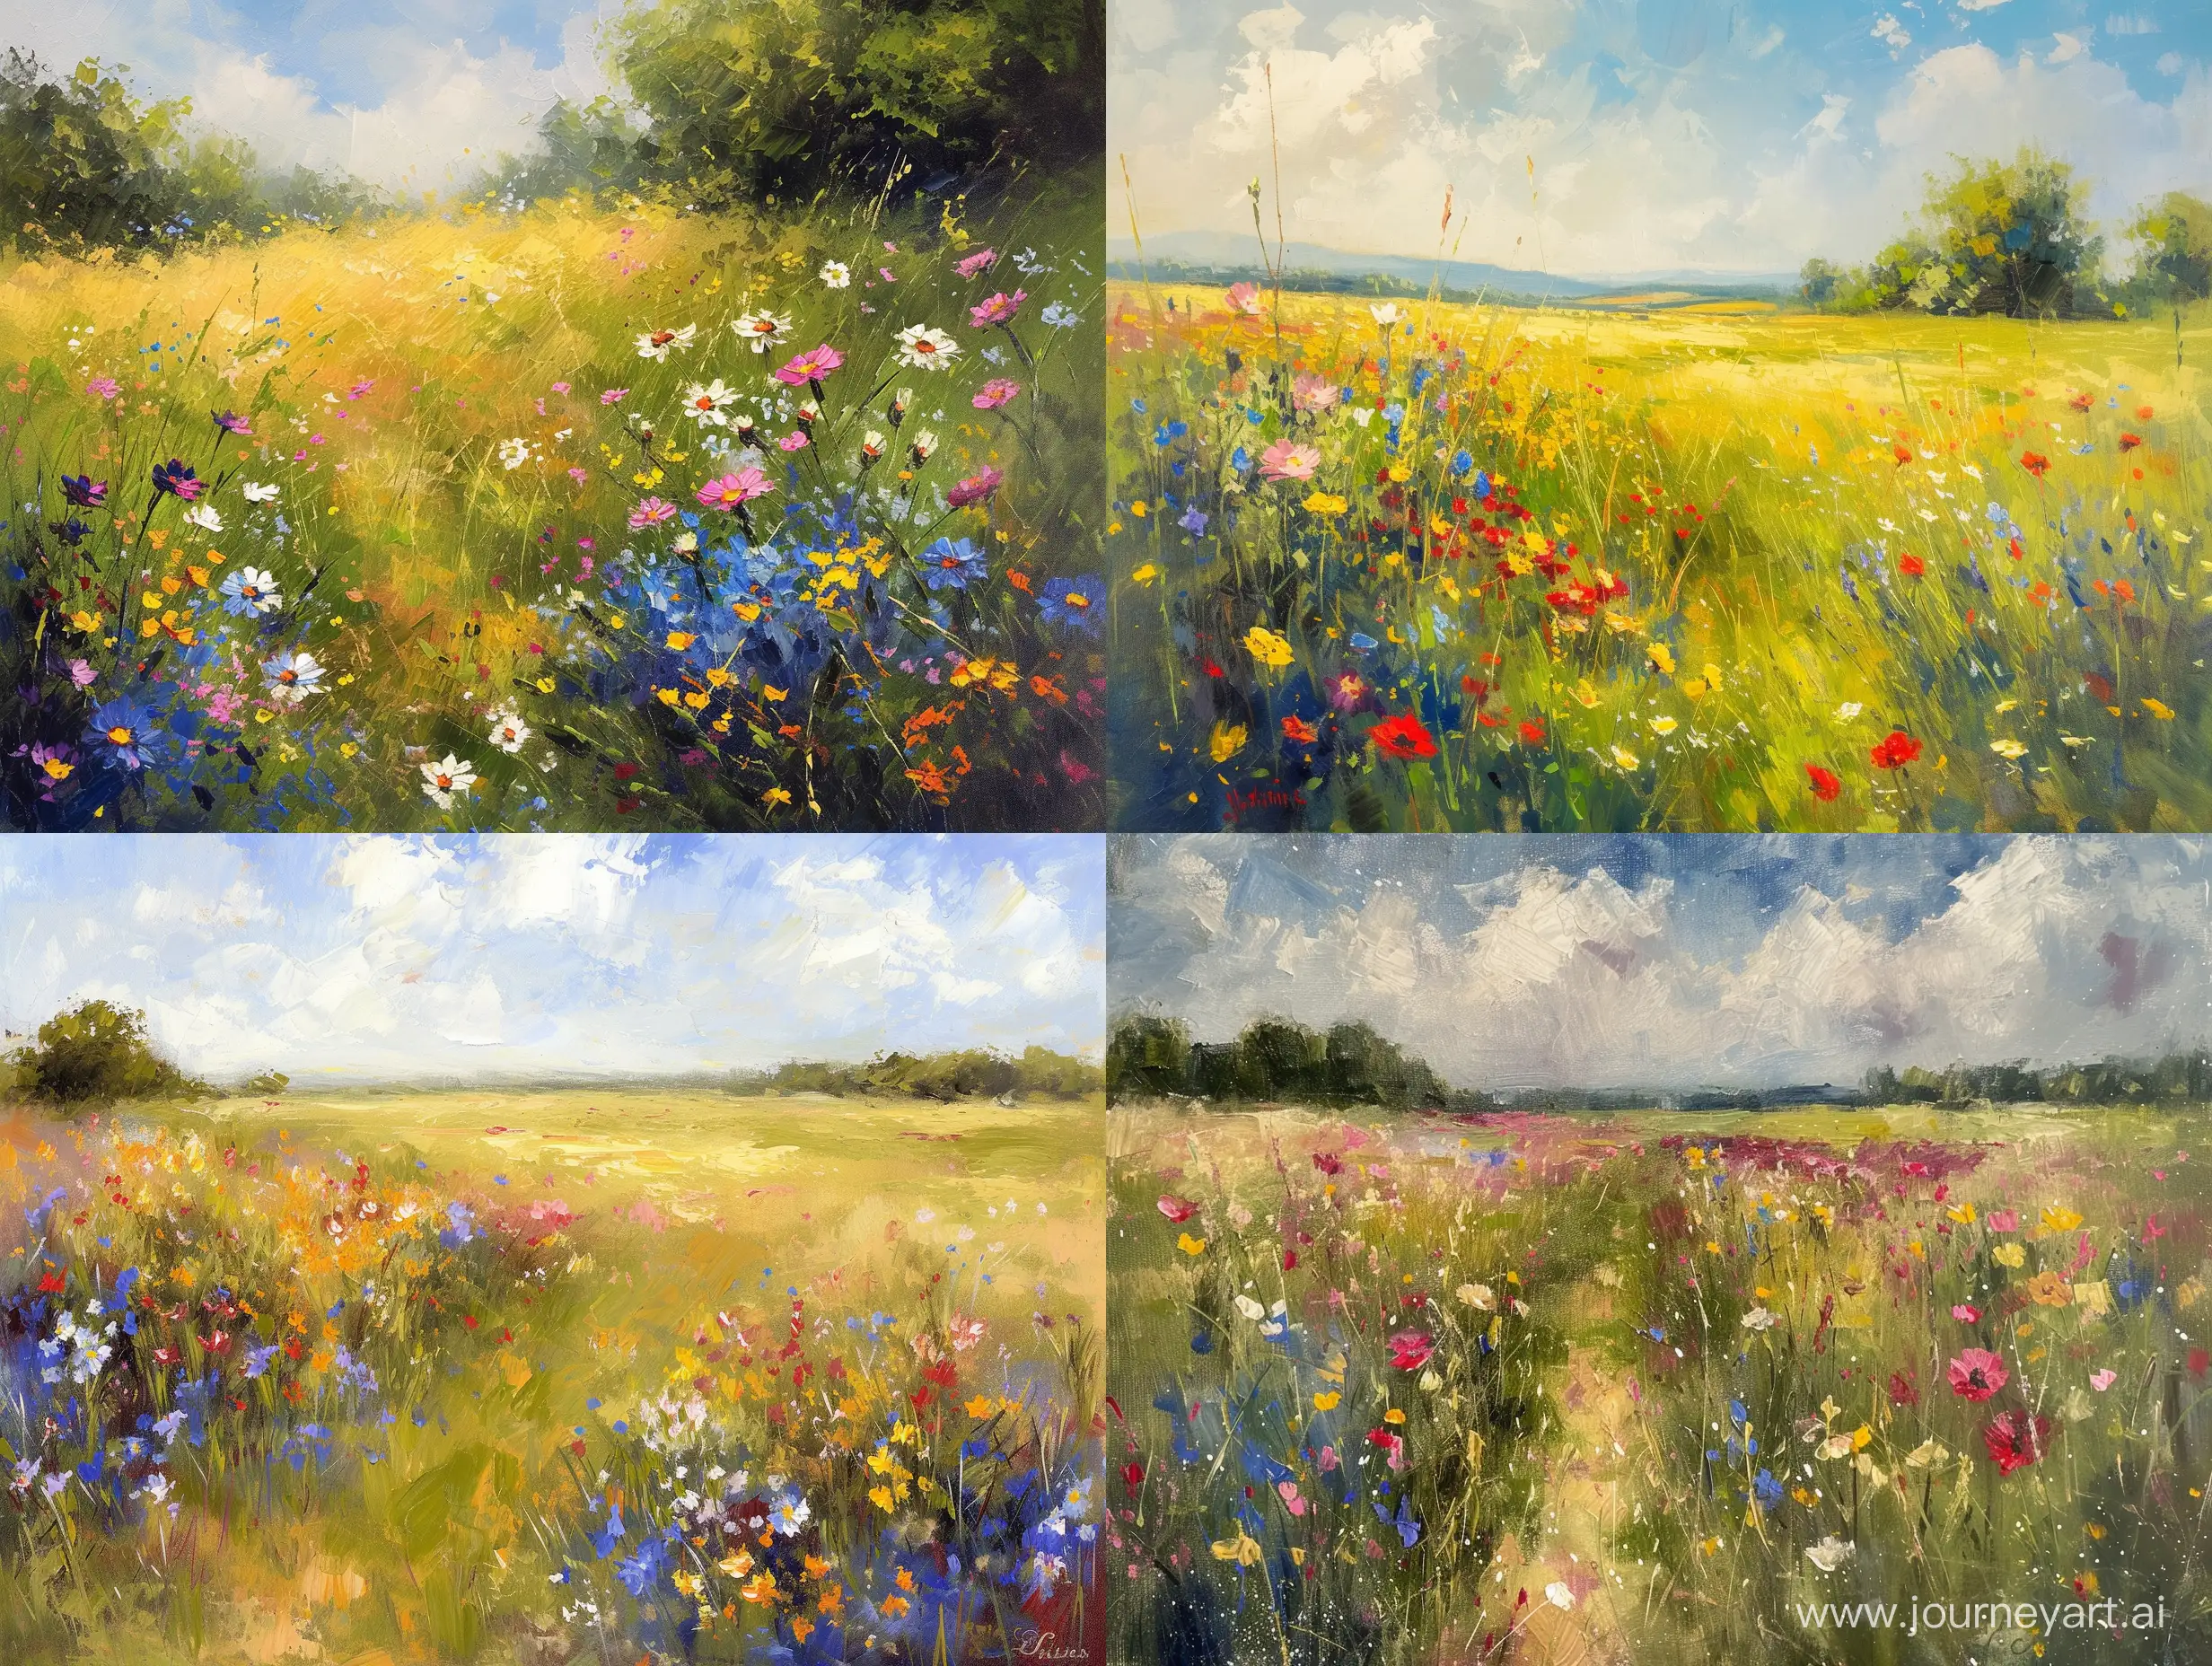 Wildflower Field Landscape Painting, Vintage Meadow Landscape, Country Field,in painting impressionism painting style,crystal clear vintage art with visible brush strokes.